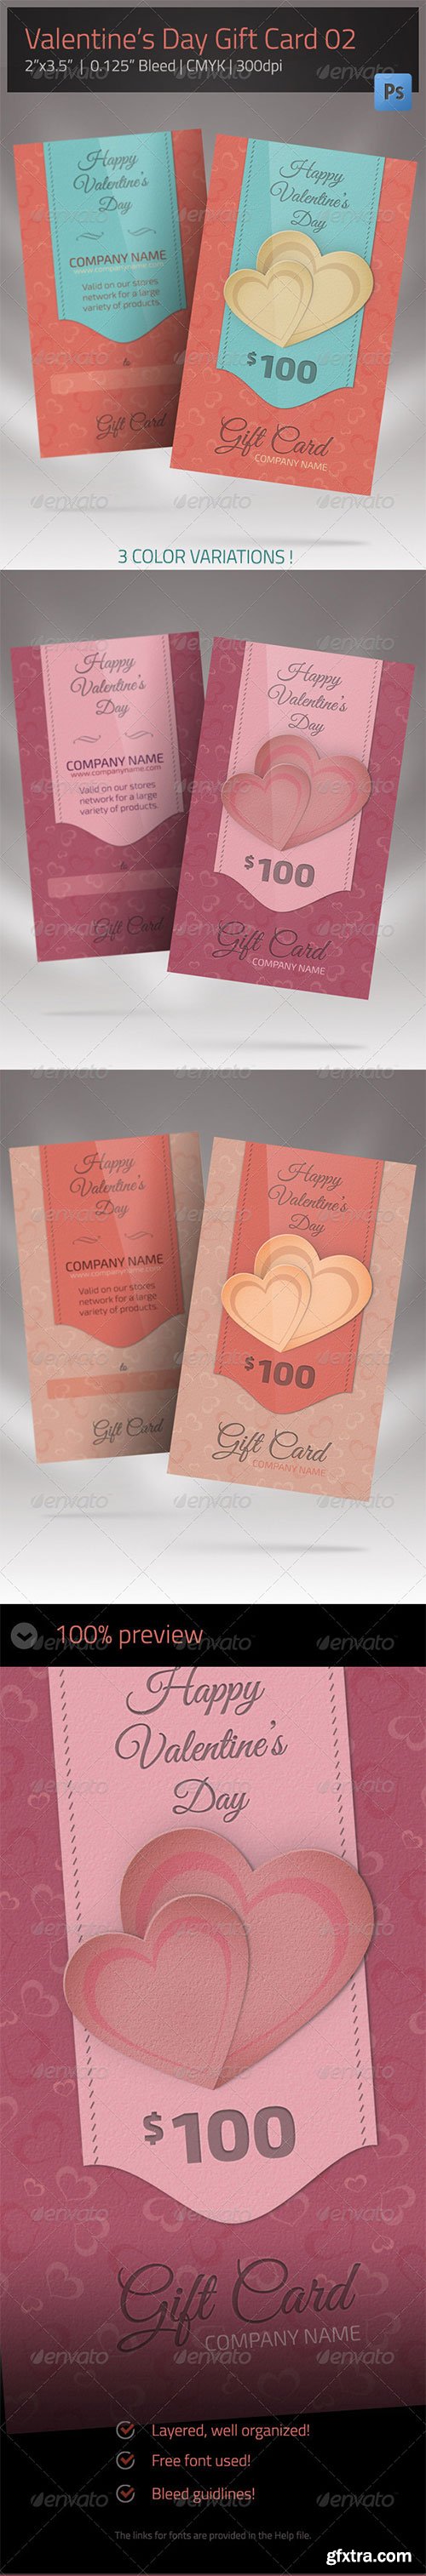 GraphicRiver - Gift Card for Valentines Day 02